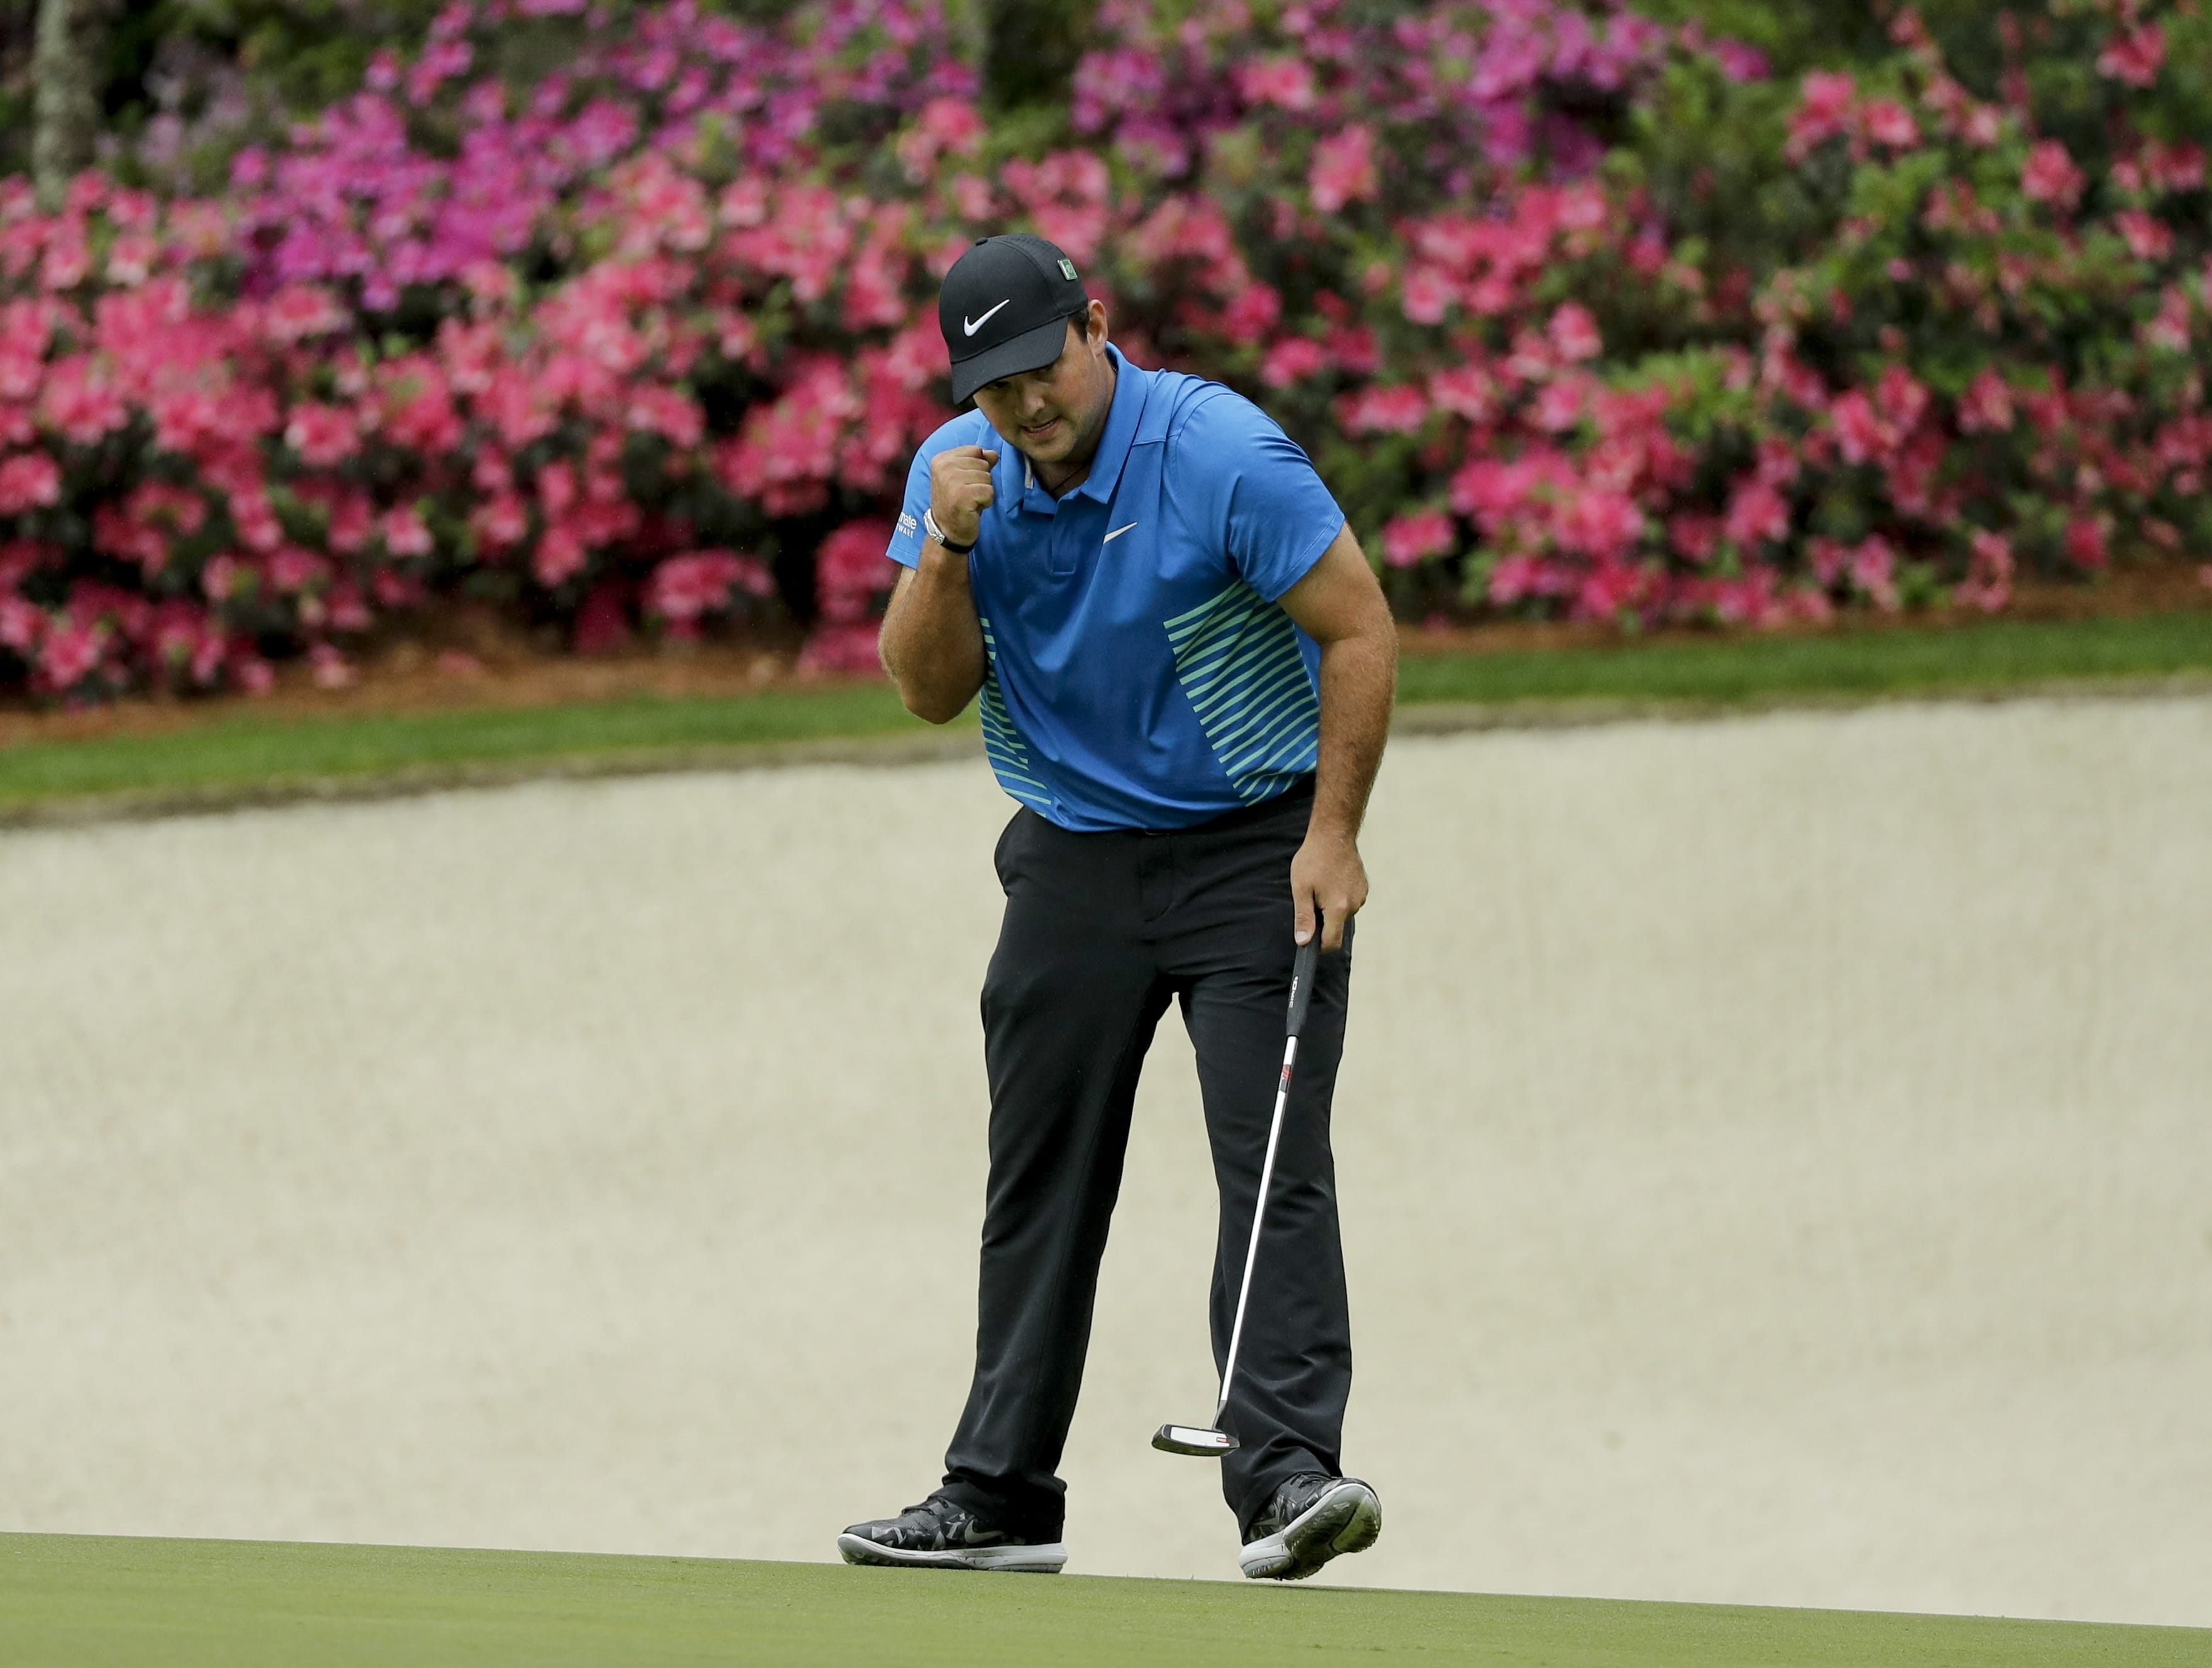 Patrick Reed reacts to his eagle on the 13th hole during the third round at the Masters golf tournament Saturday, April 7, 2018, in Augusta, Ga. (AP Photo/David J.